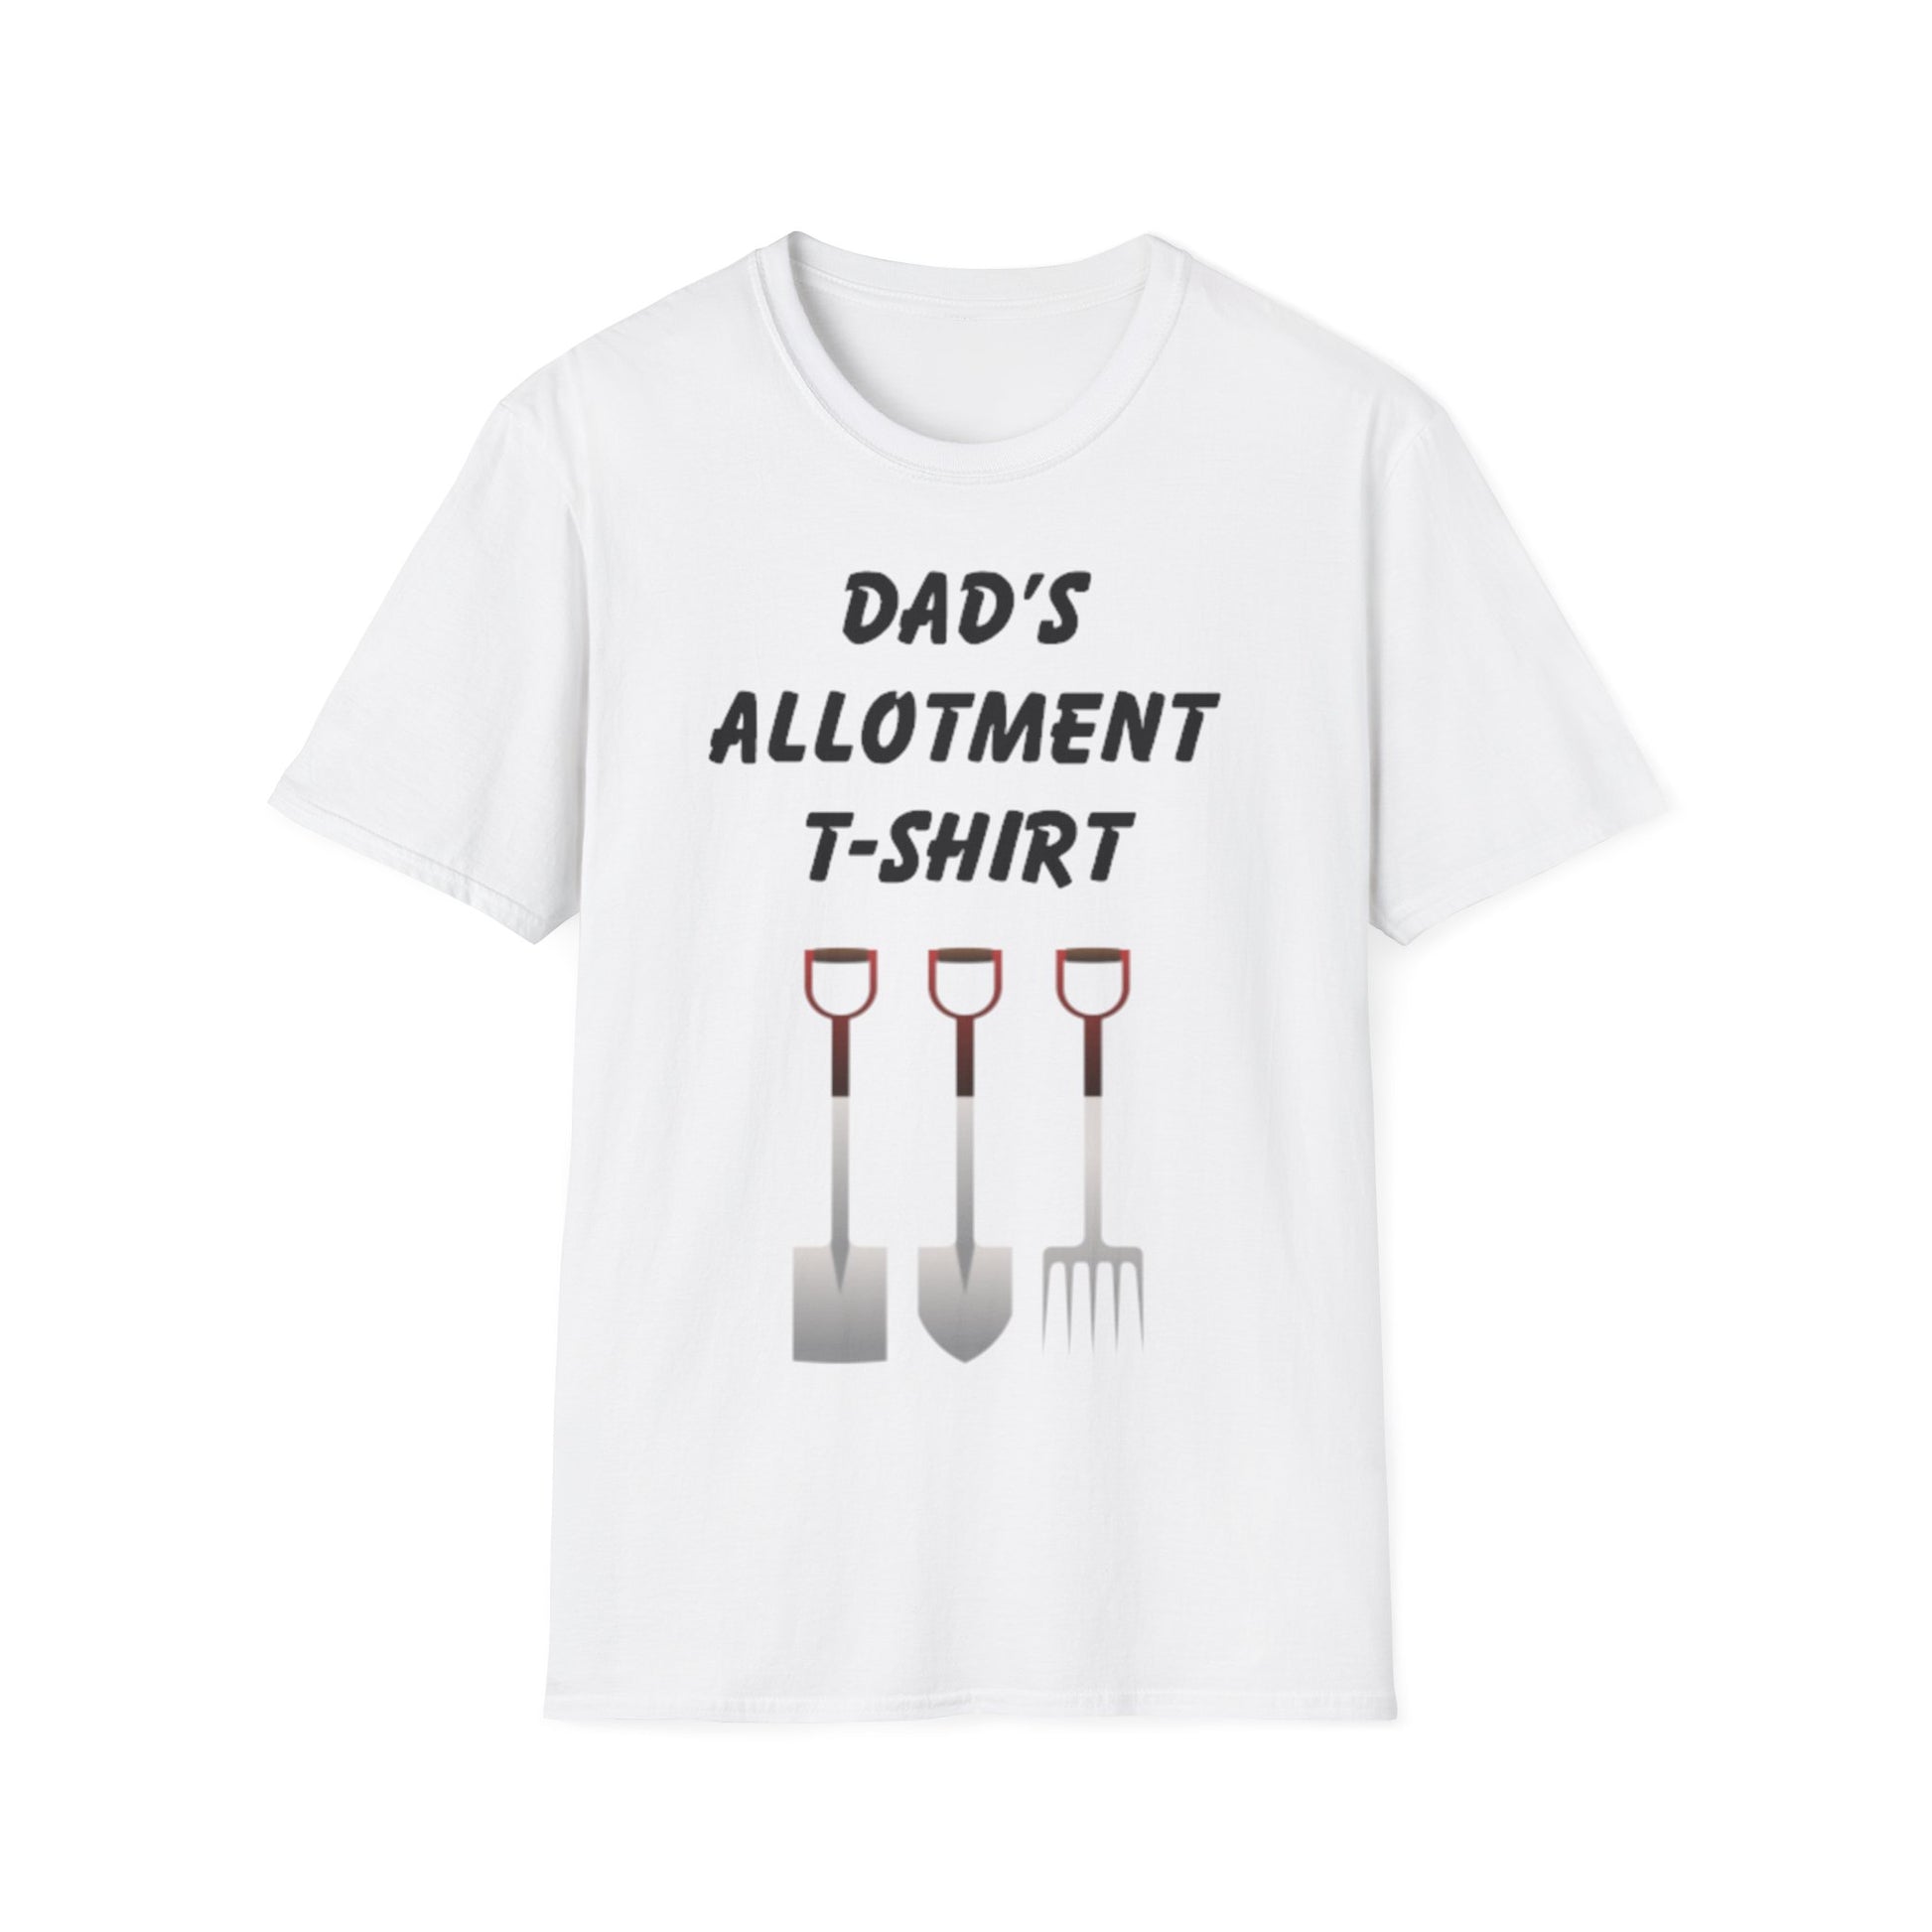 A white t-shirt with a design of gardening tools and the words Dad's Allotment T-shirt above them.